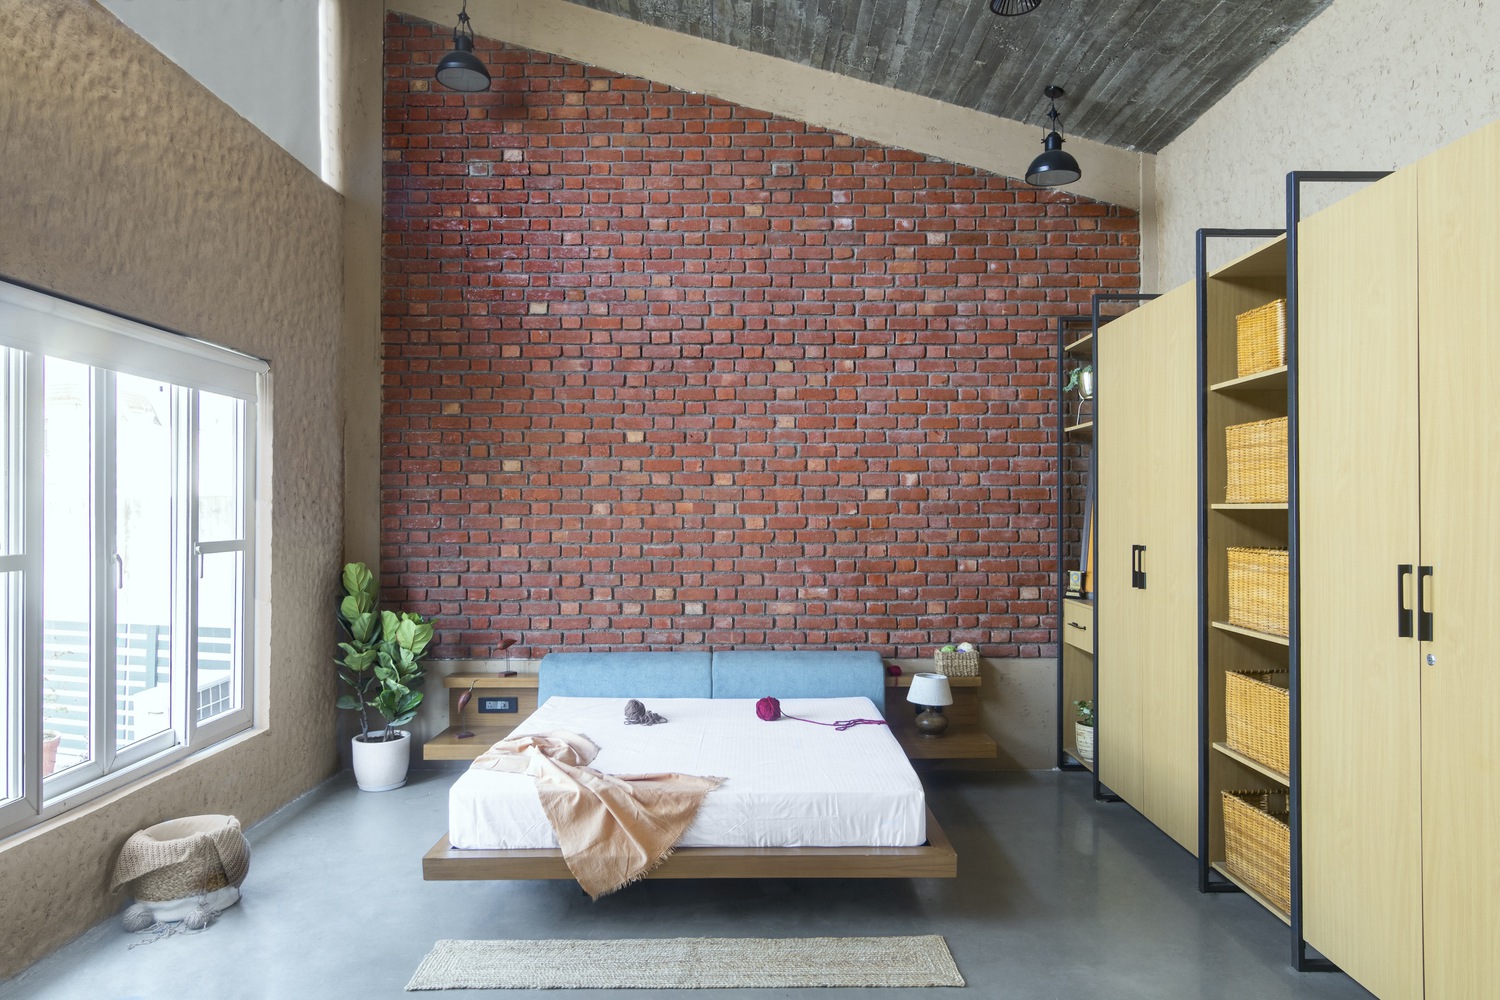 One of the bedrooms of the Nilaya Residence. Photo by Harsh Nigam.